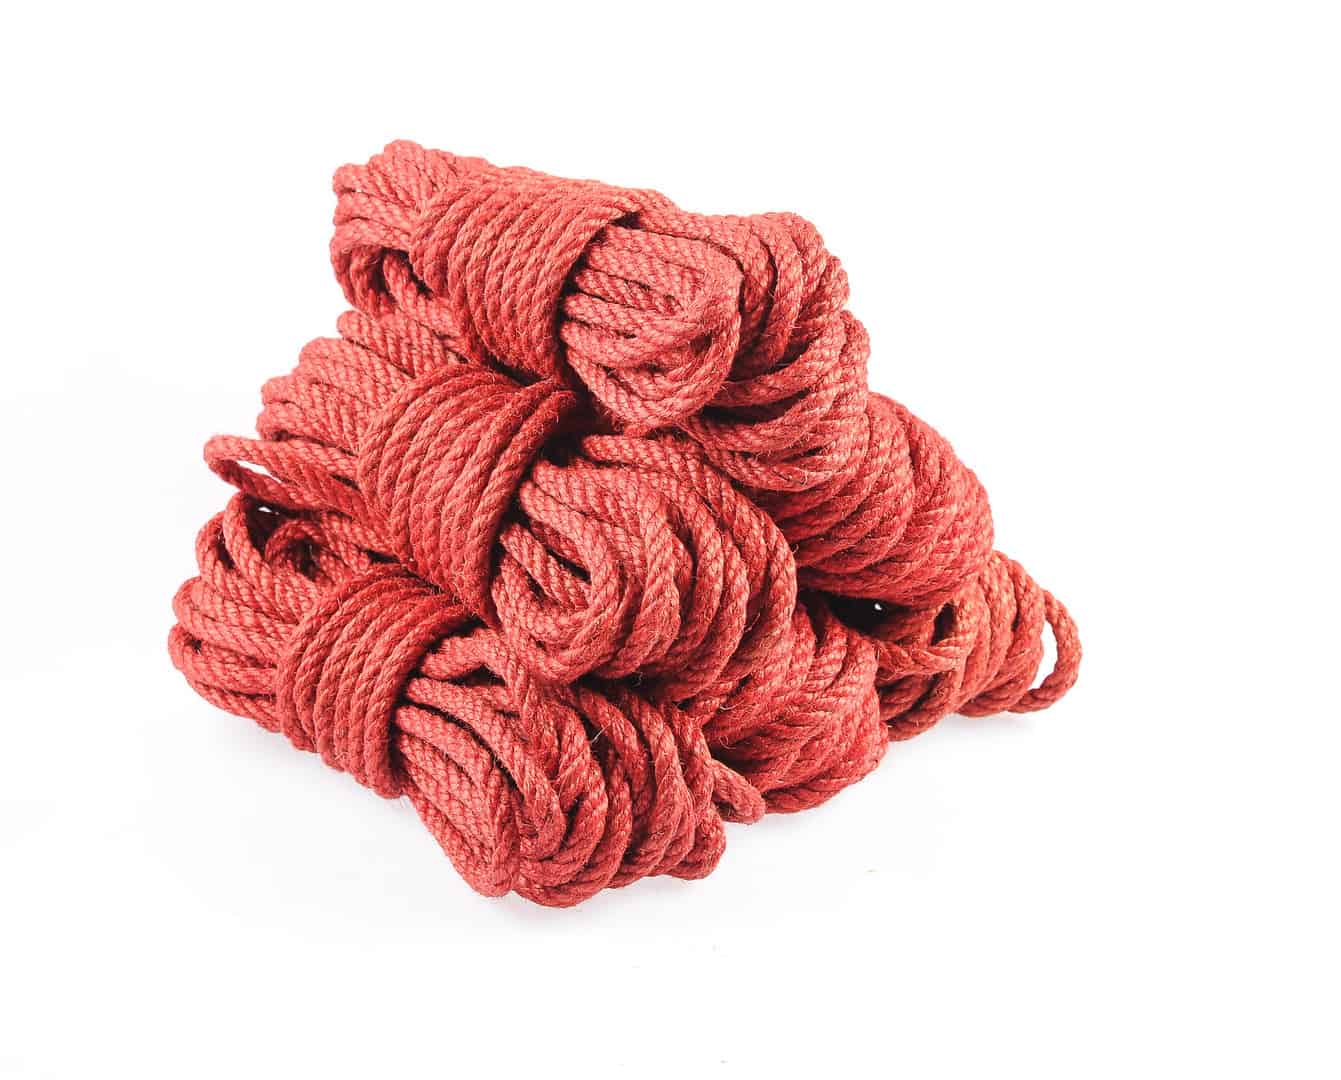 Romantic Red Cotton Bondage Rope  Knotty Desires Twisted Cotton Rope